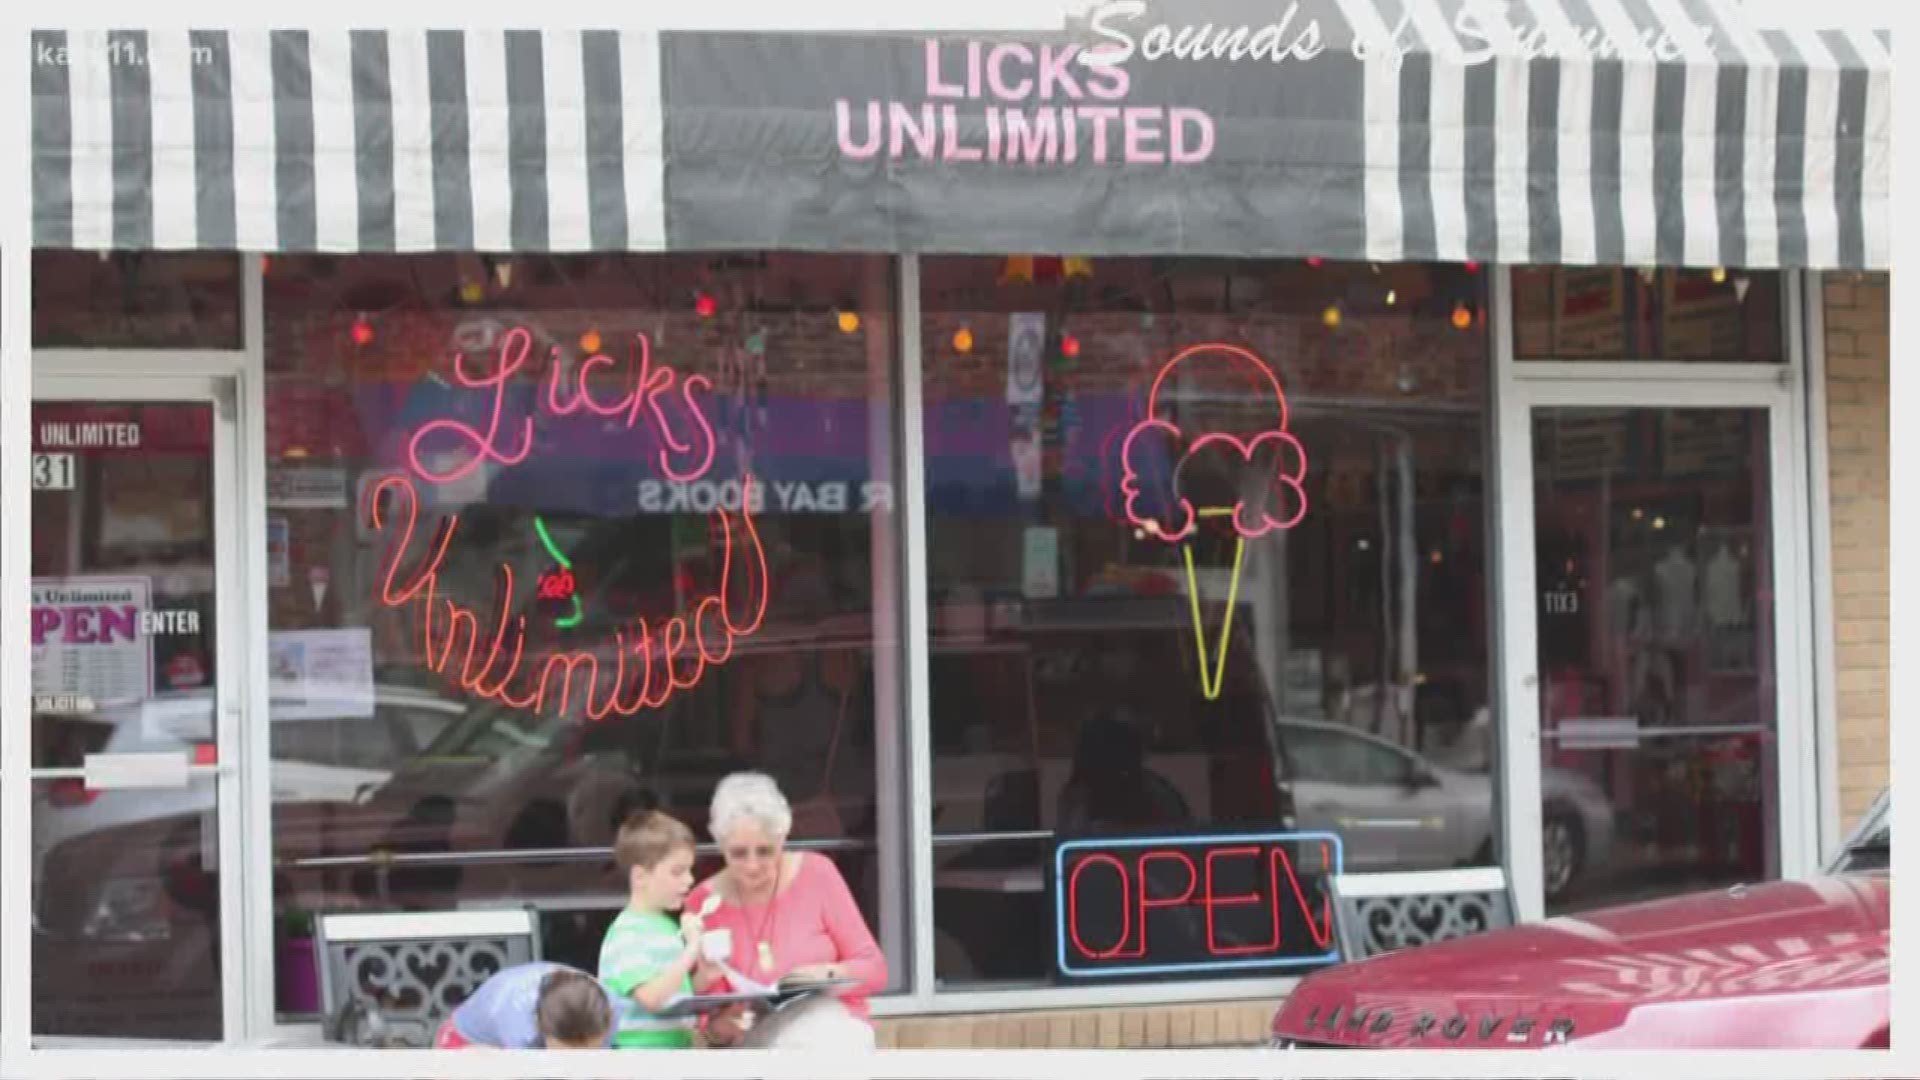 We're bringing you the sounds of summer on KARE 11 Sunrise, starting with Licks Unlimited ice cream shop in Excelsior!